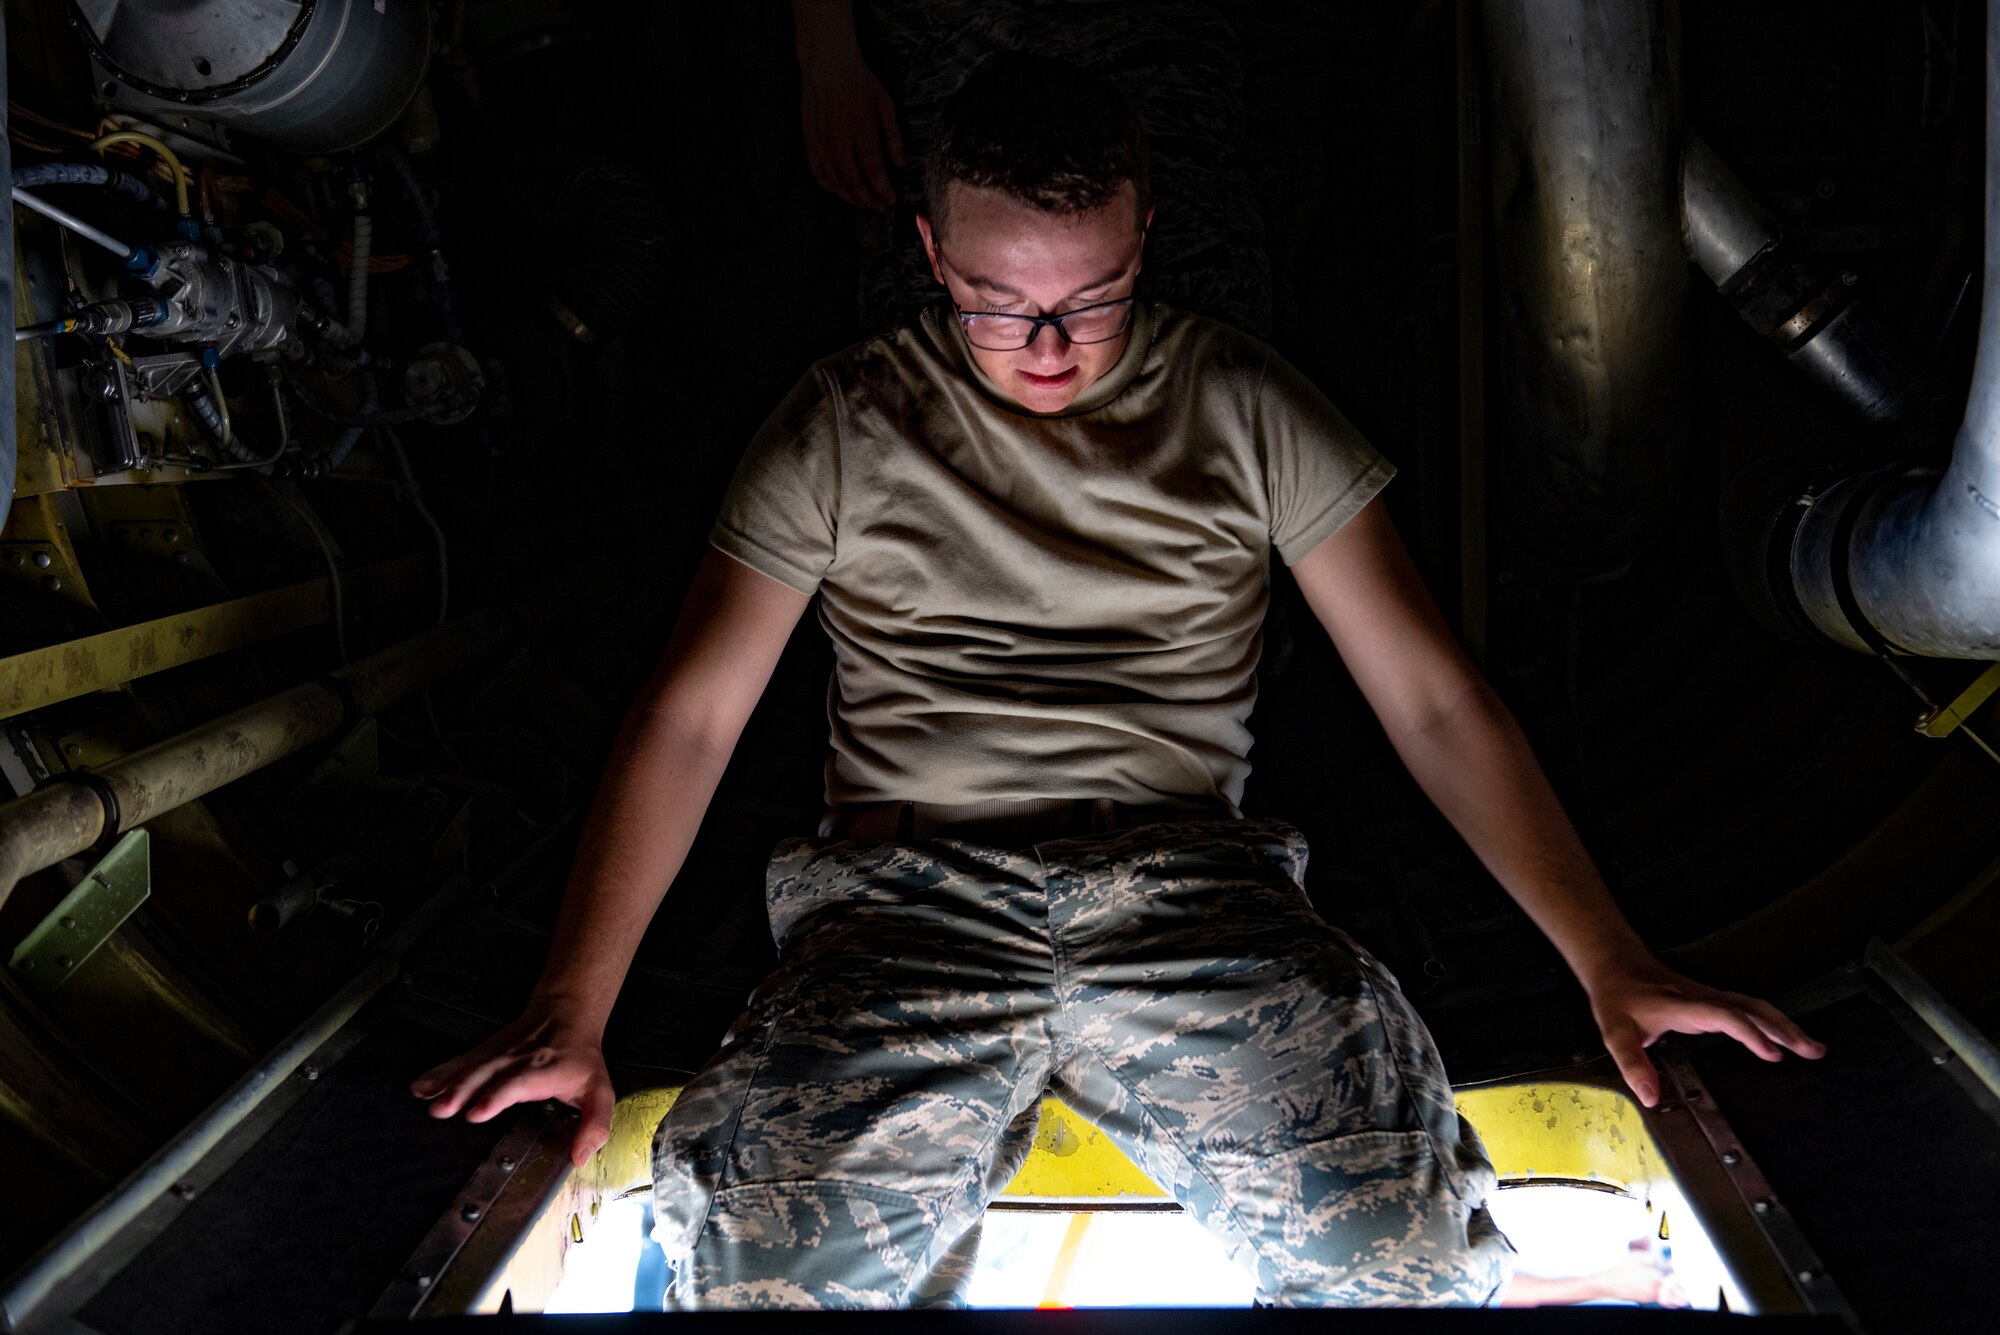 Airman Greg Hogle, 362nd Training Squadron B-52 crew chief apprentice course student, exits a B-52 Stratofortress at Sheppard Air Force Base, Texas, July 2, 2019. Hogle and his class have only recently got to work on the B-52, but are already getting a lot of experience with it, especially the experience of working inside the belly of a beast which is easily hotter than the already hot Texas weather. (U.S. Air Force photo by Airman 1st Class Pedro Tenorio)